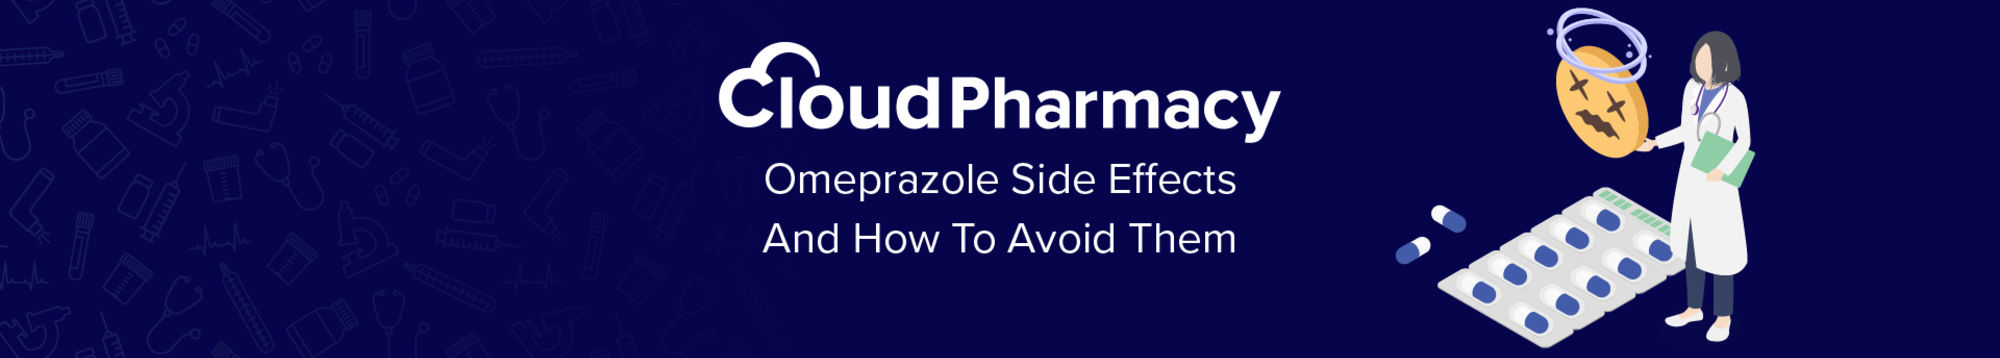 a banner image that reads' Cloud Pharmacy Omeprazole Side Effects And How To Avoid Them